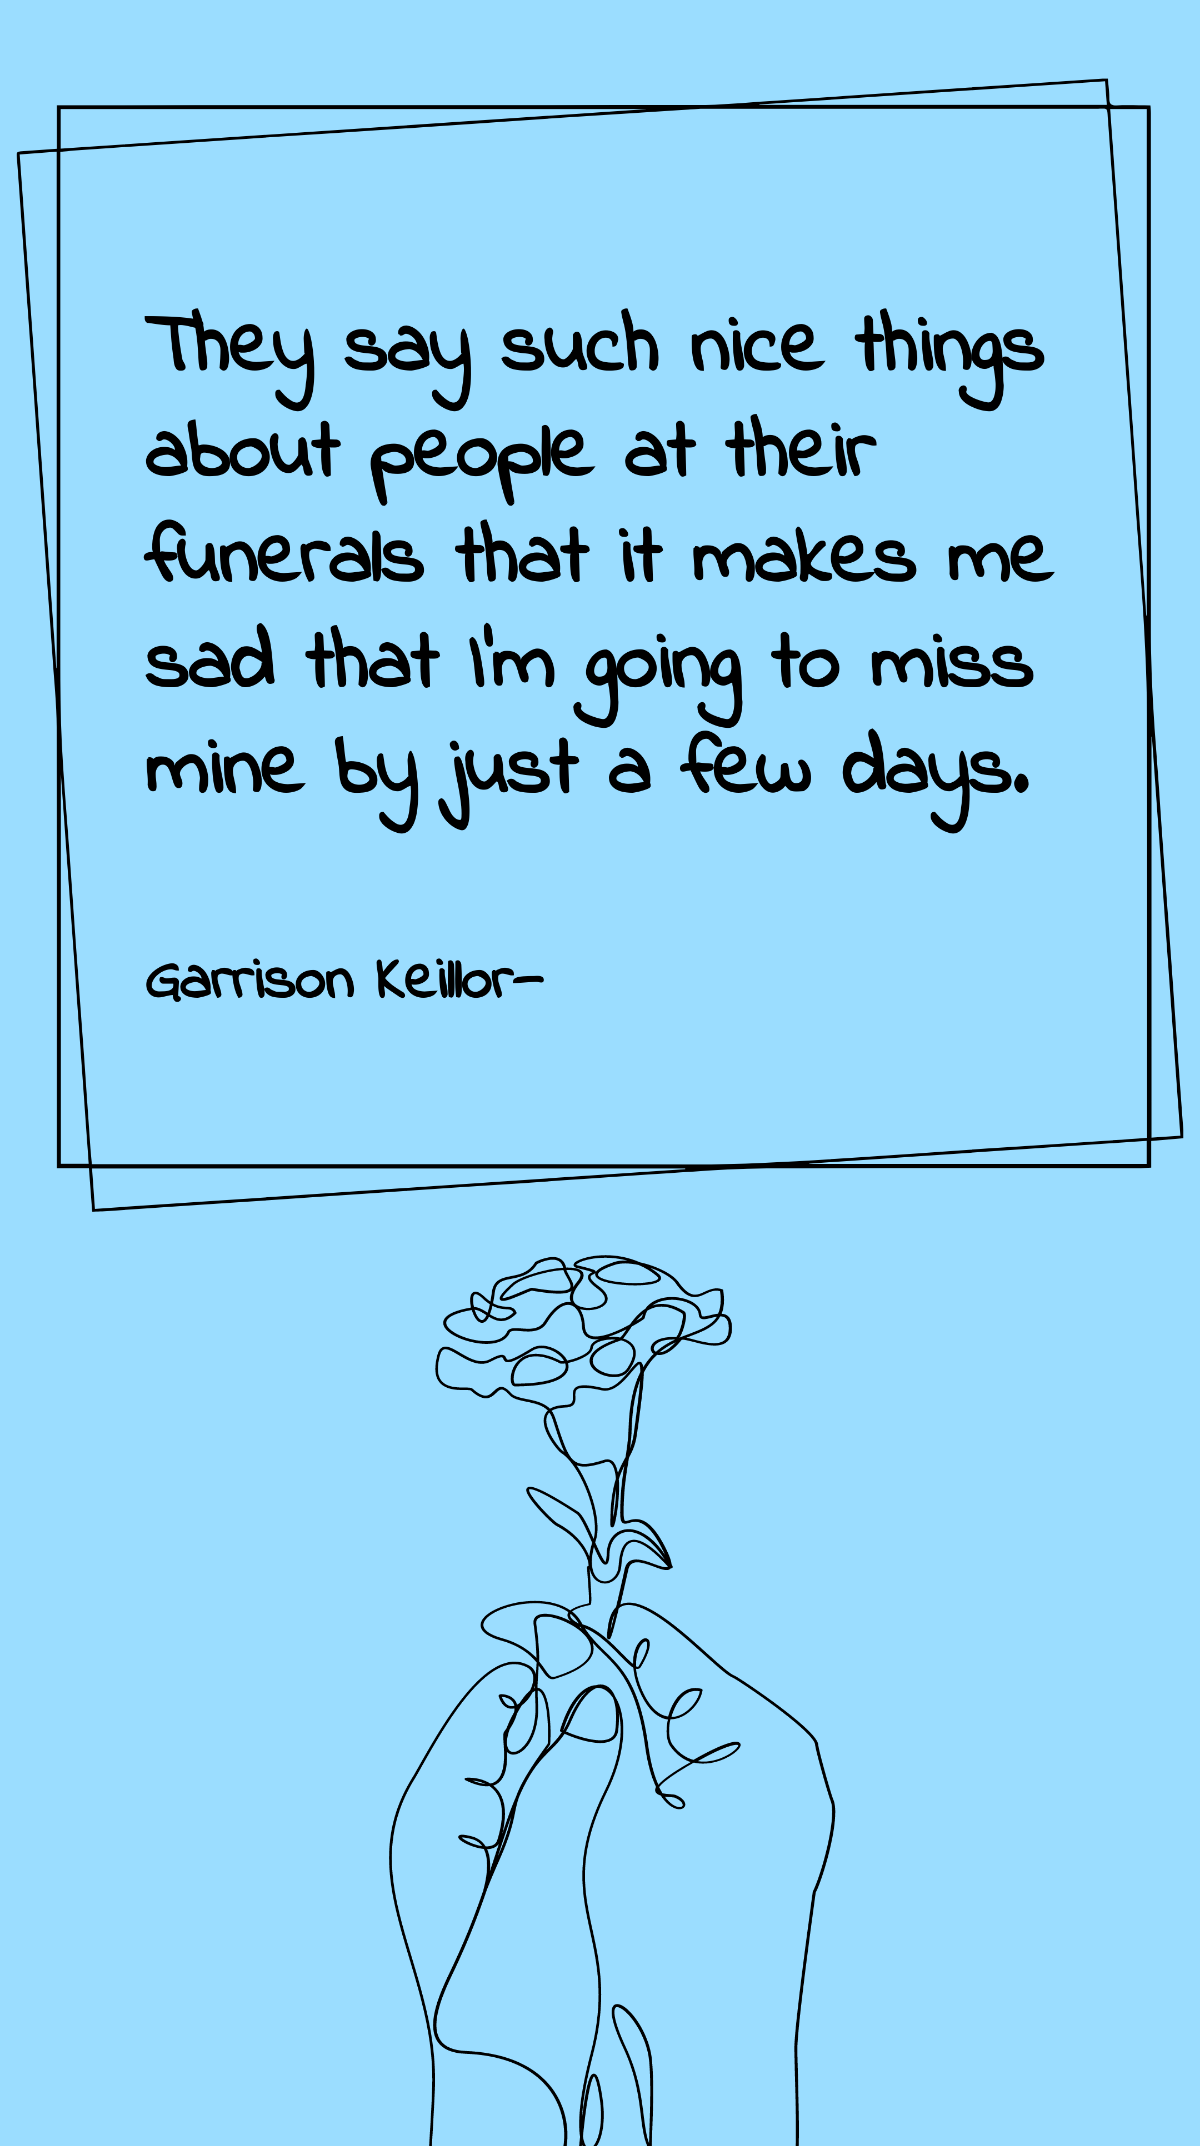 Garrison Keillor - They say such nice things about people at their funerals that it makes me sad that I'm going to miss mine by just a few days. Template